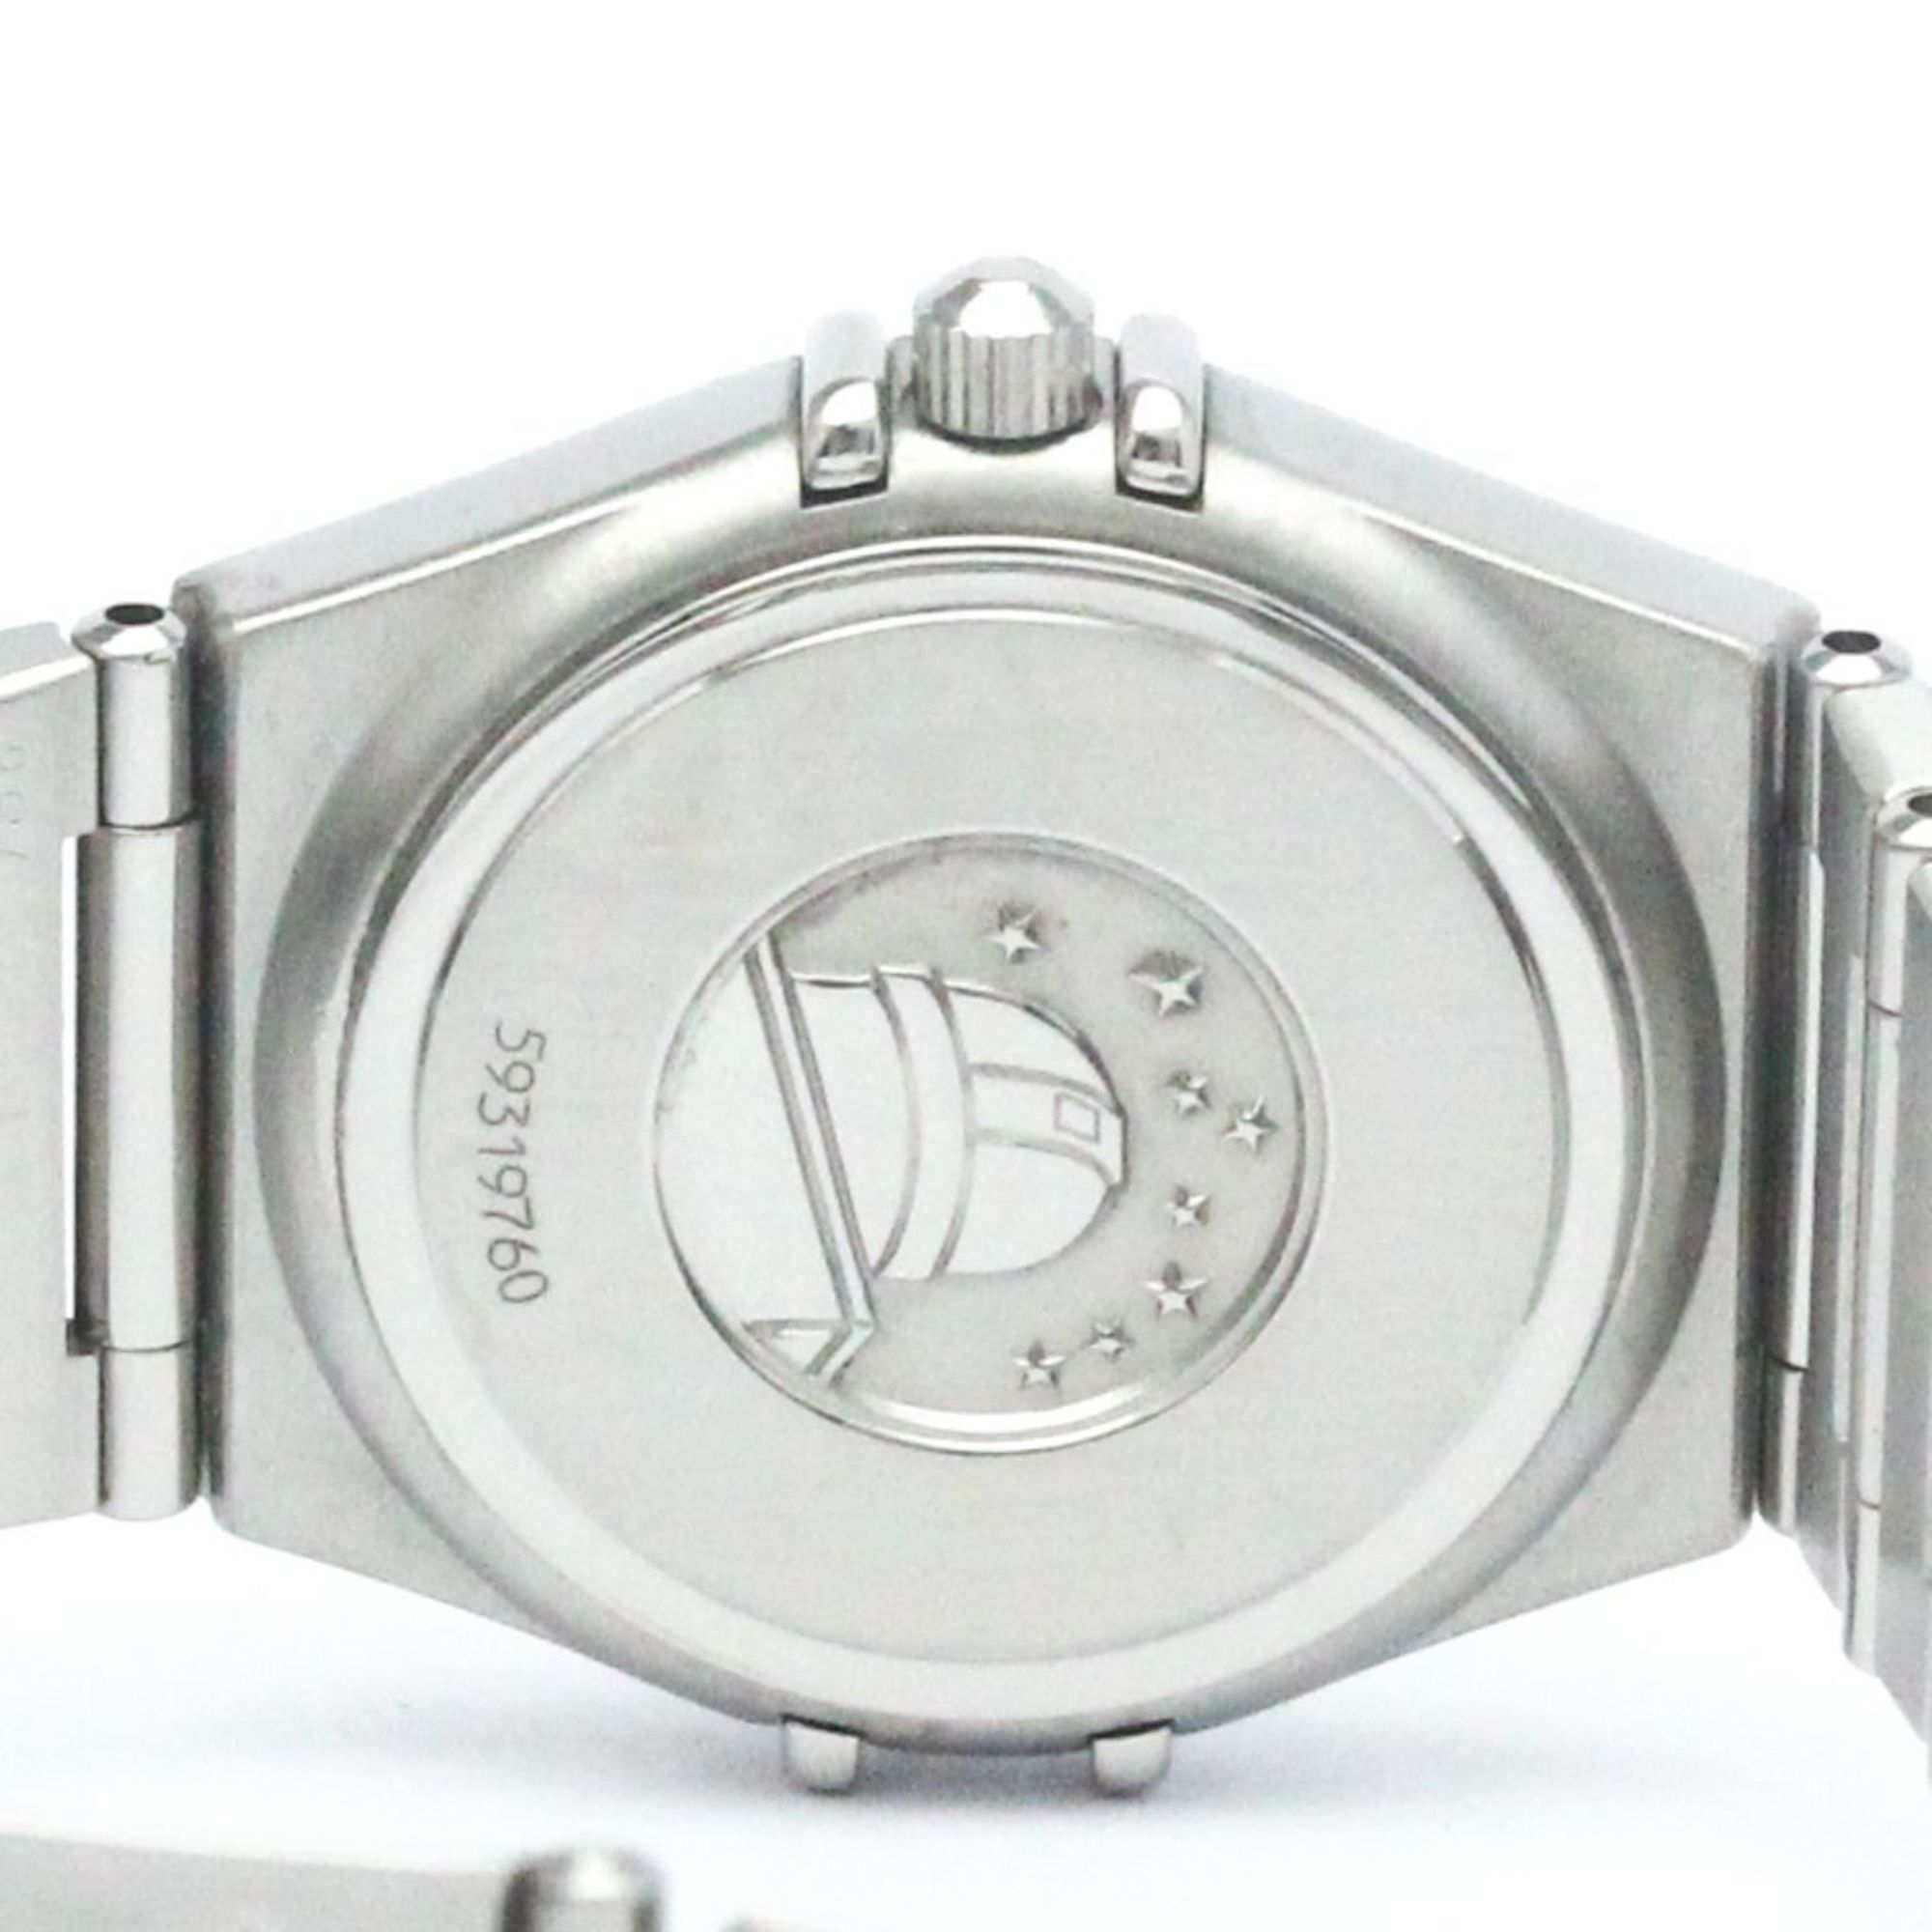 Polished OMEGA Constellation Stainless Steel Quartz Mens Watch 1512.40 BF569403